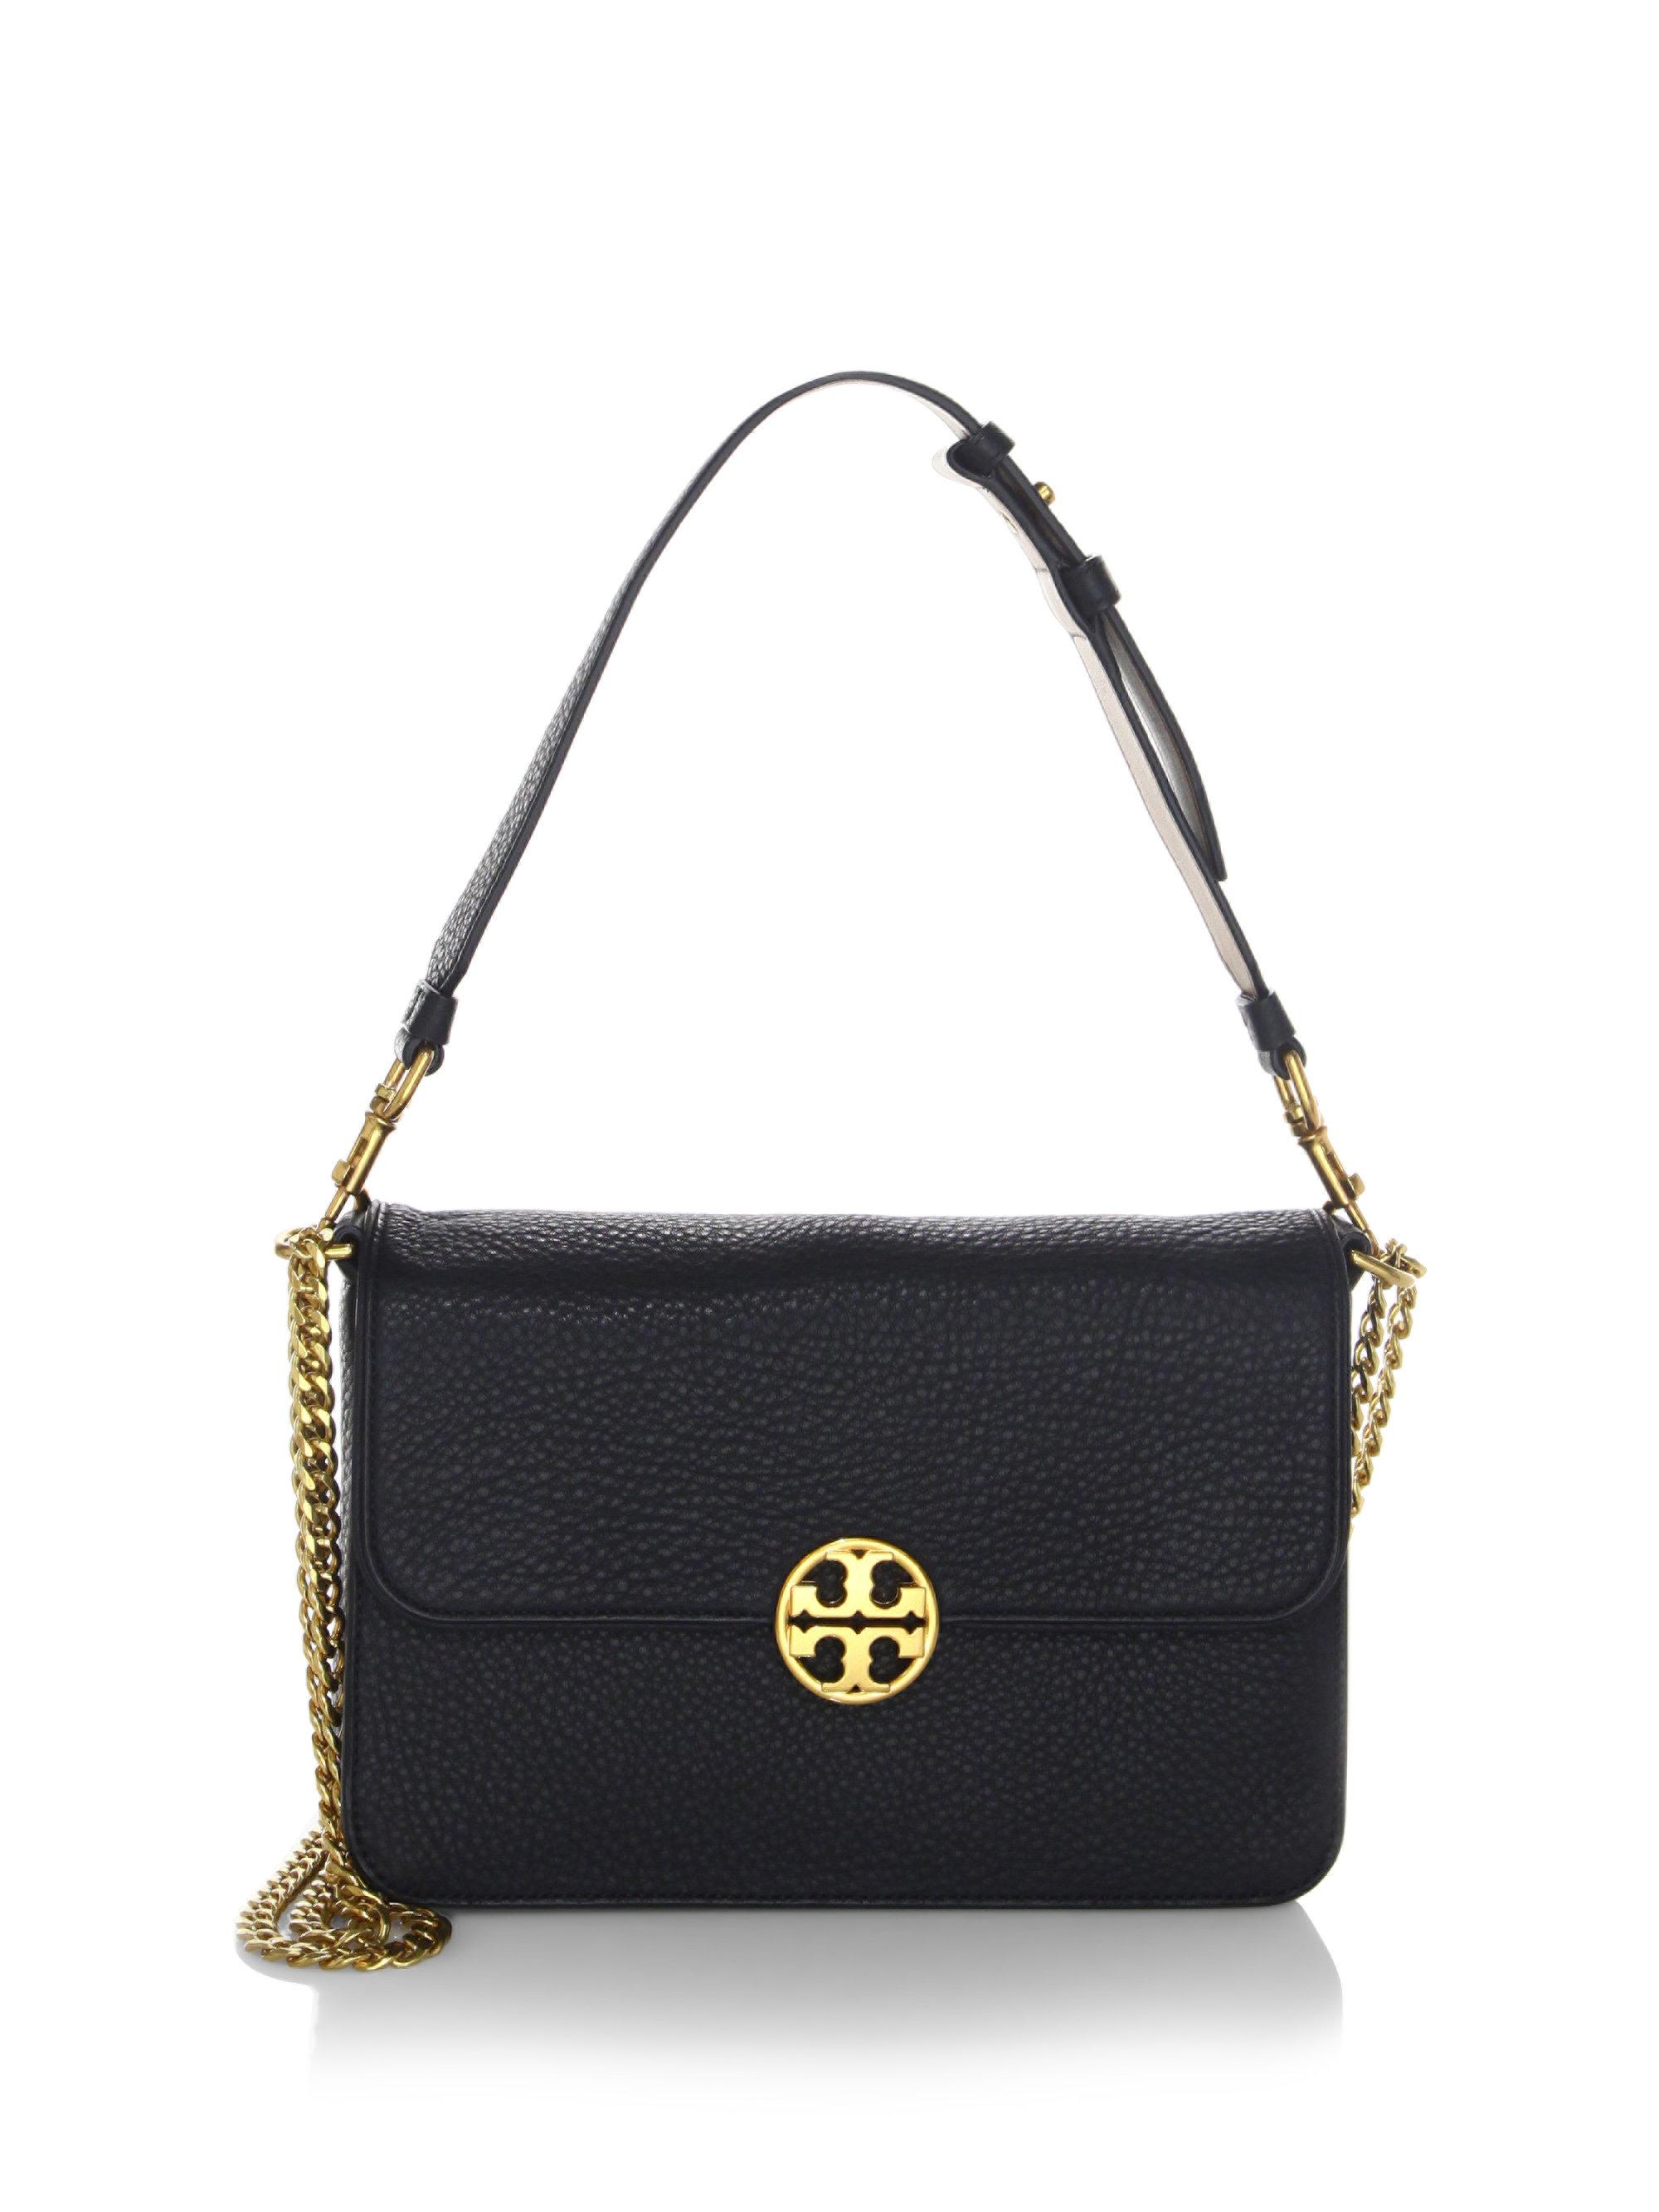 Lyst - Tory Burch Chelsea Double Strap Leather Shoulder Bag in Black